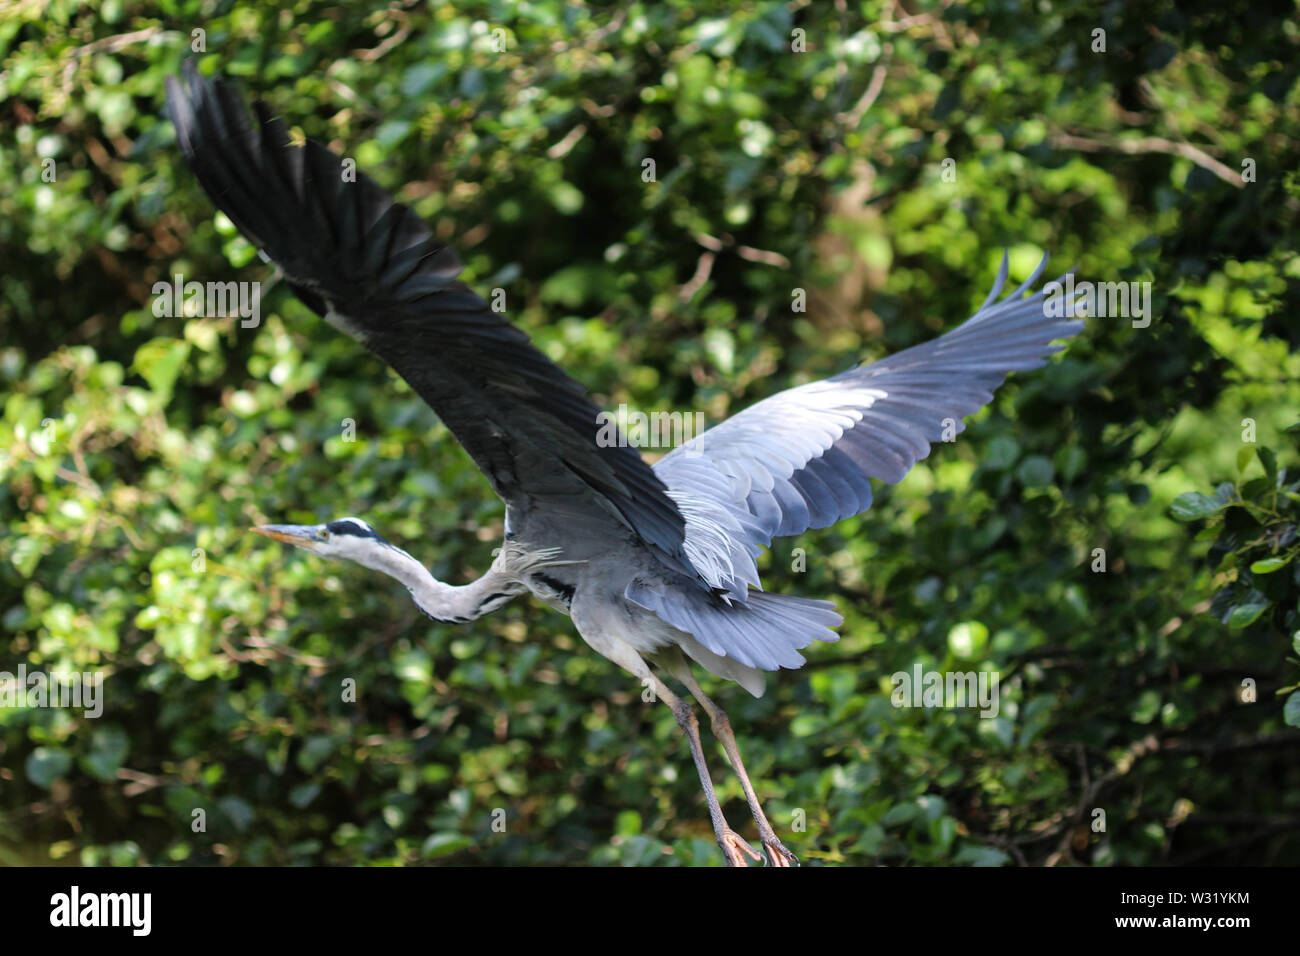 Stork Logo High Resolution Stock Photography and Images - Alamy